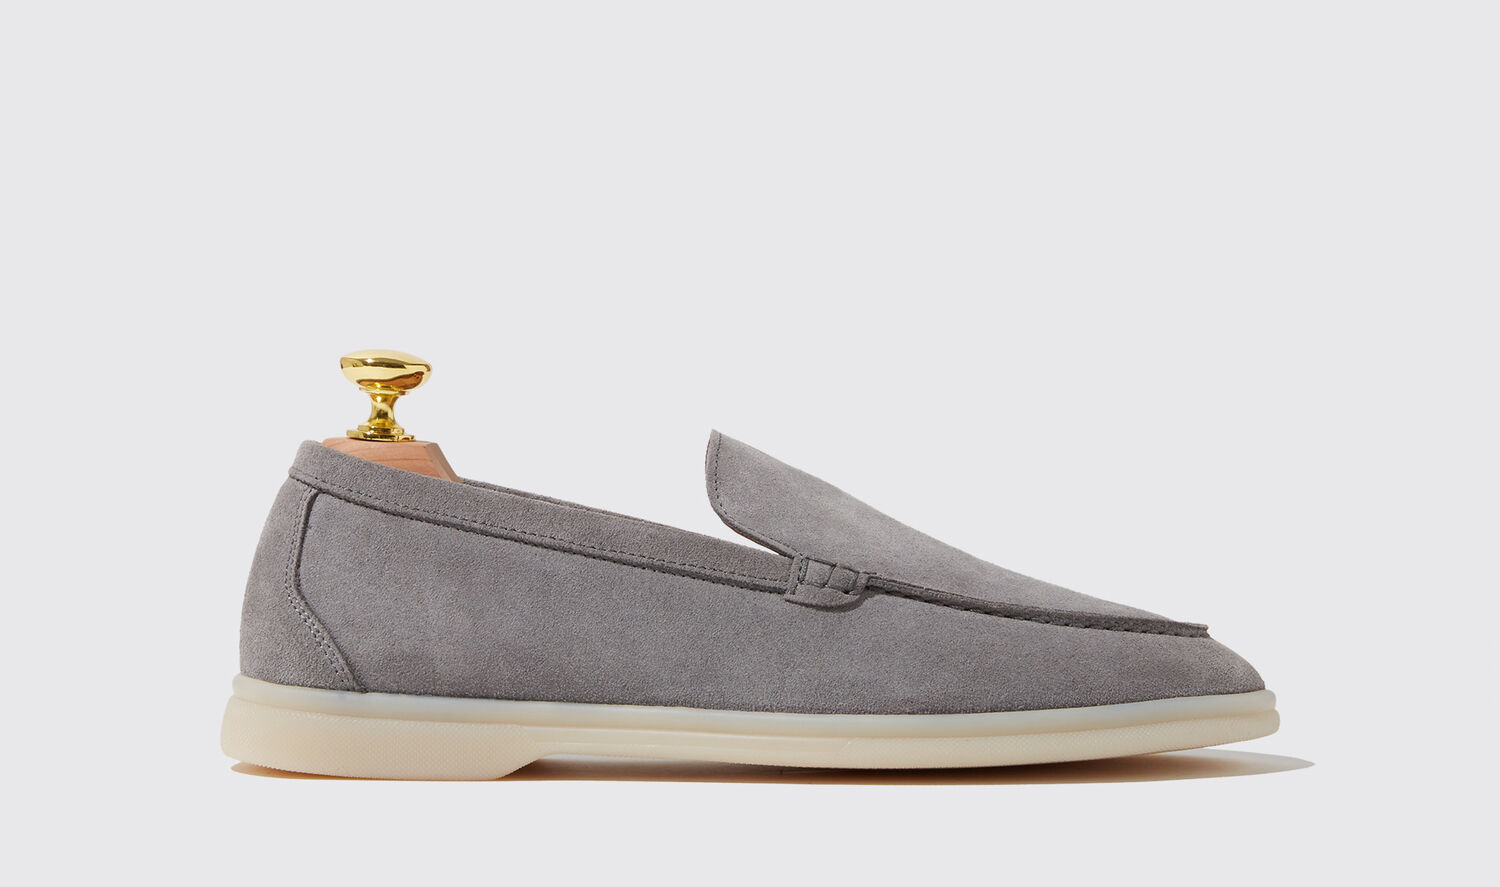 Shop Scarosso Ludovica Grigia Scamosciata - Woman Loafers Grey In Grey - Suede Leather